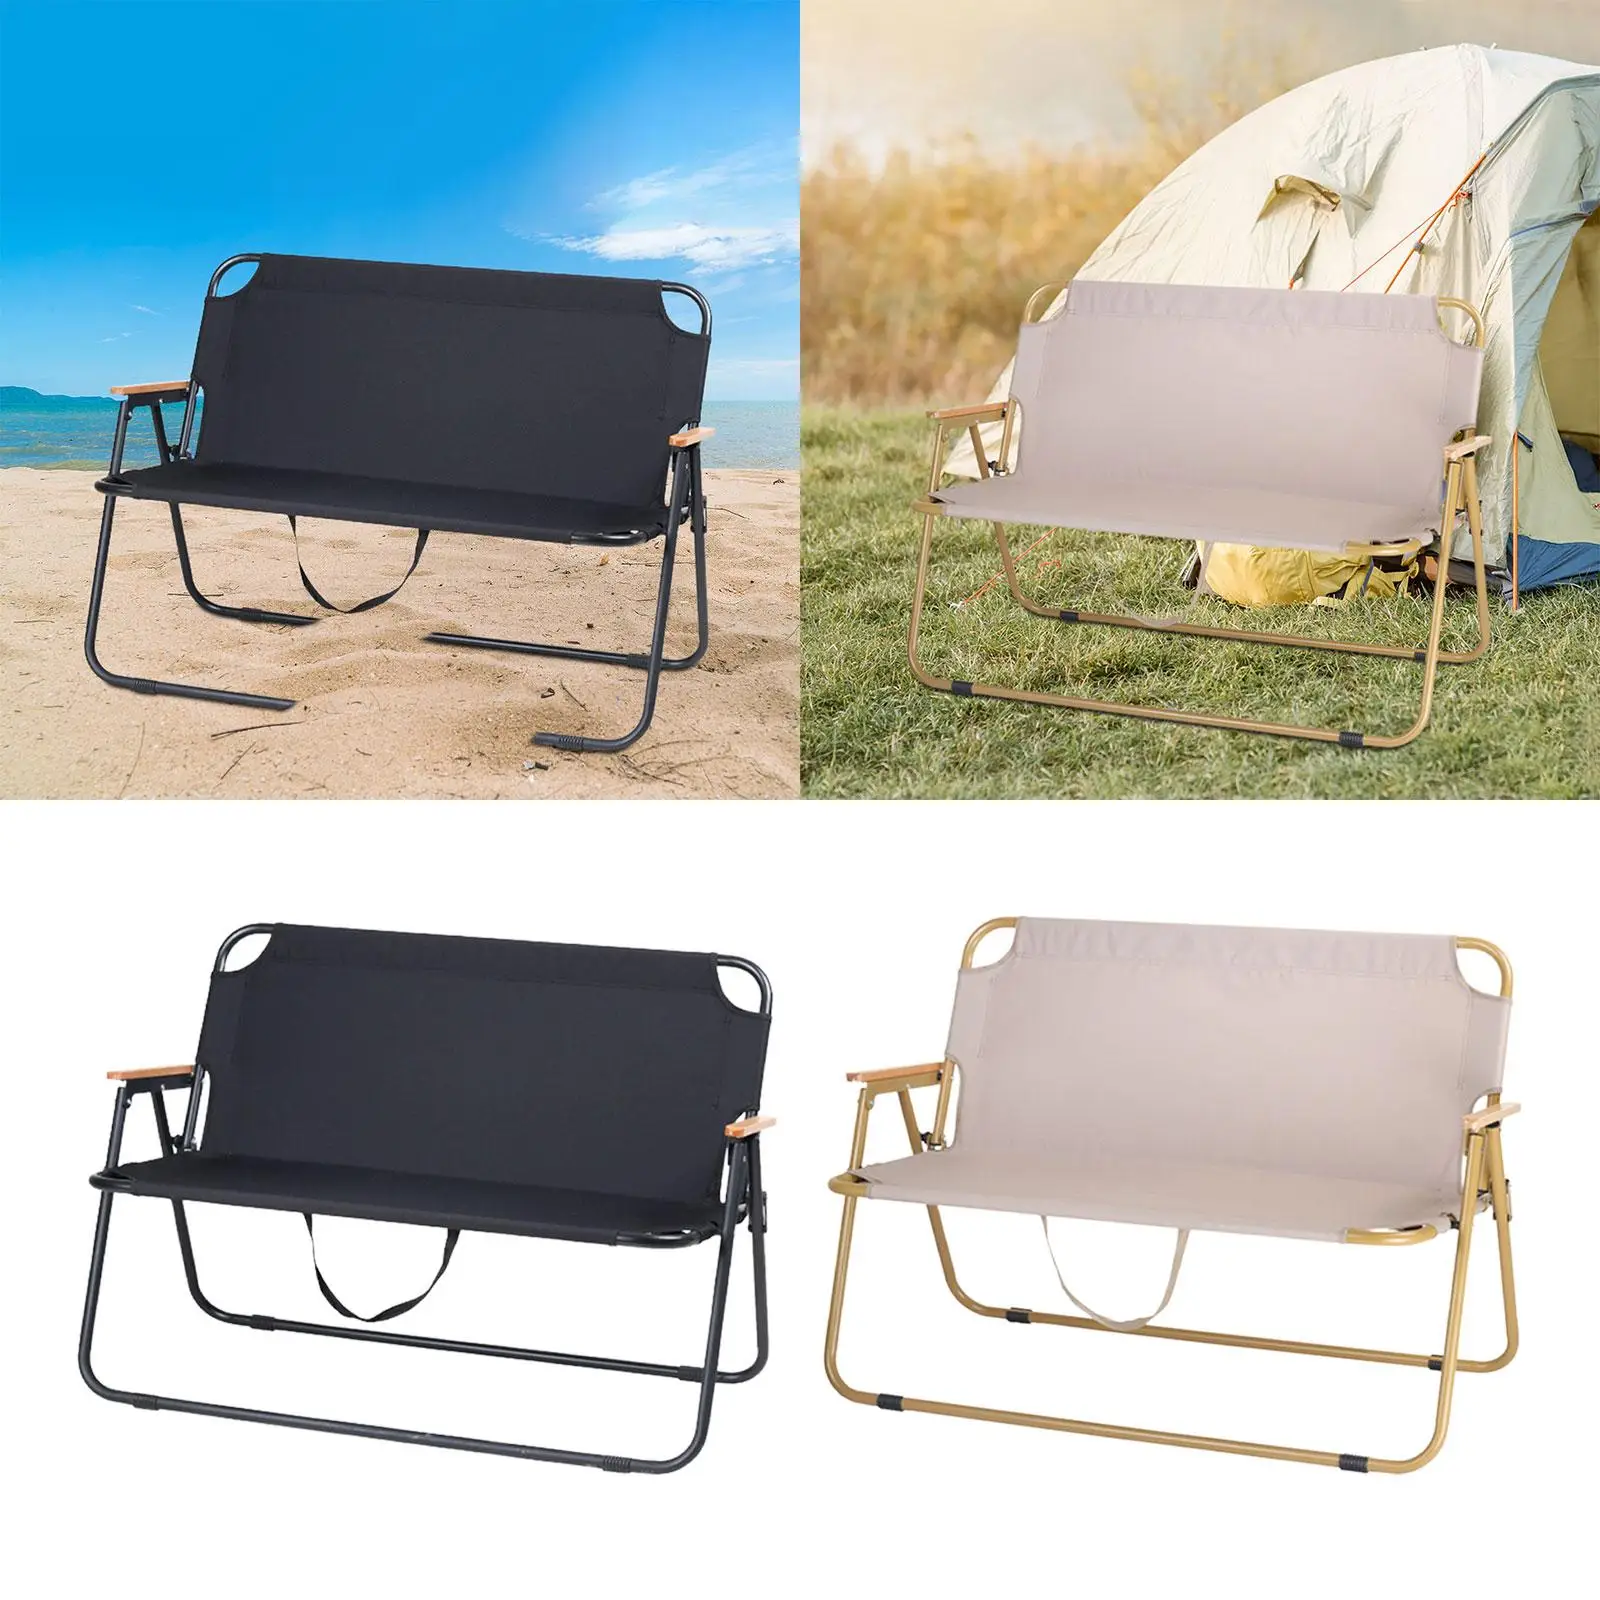 Folding Camping Chair Travel Outdoor Hiking Camping Stool Chair Camping Seat Outside Lightweight Camp Chair Armchair